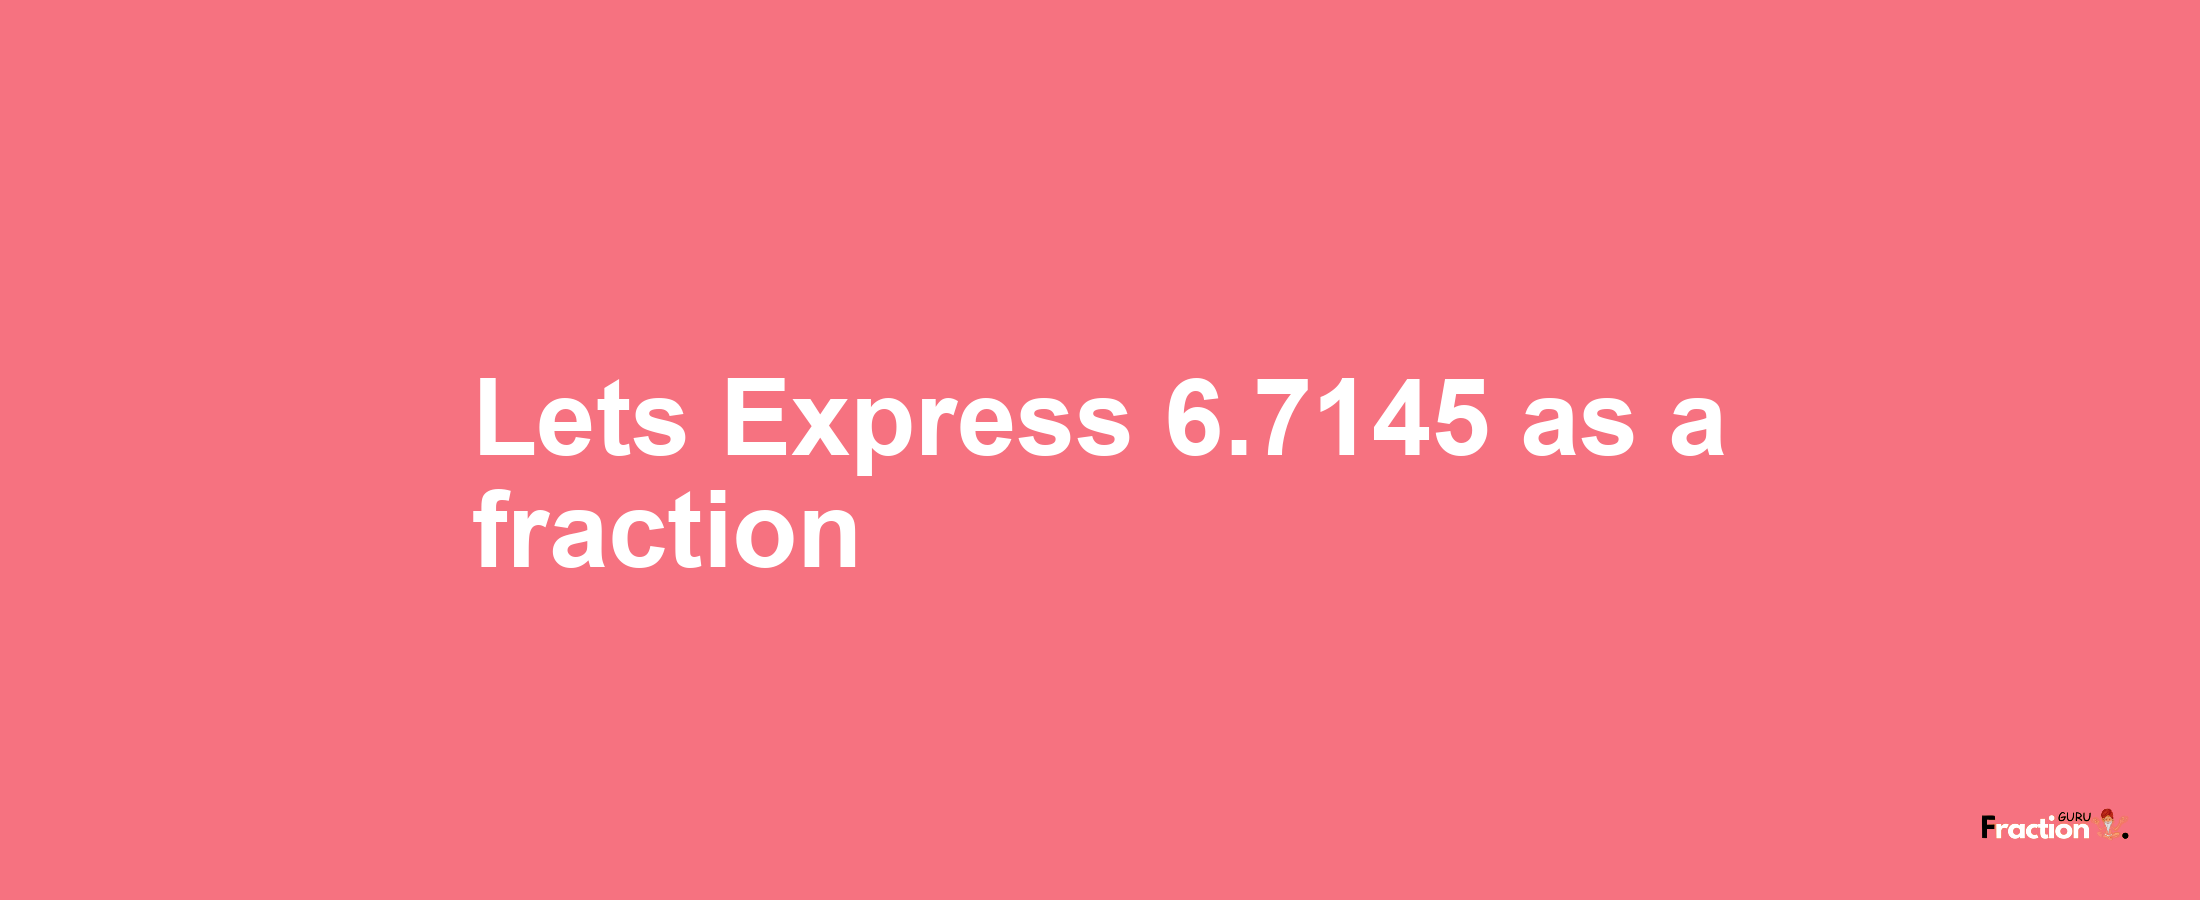 Lets Express 6.7145 as afraction